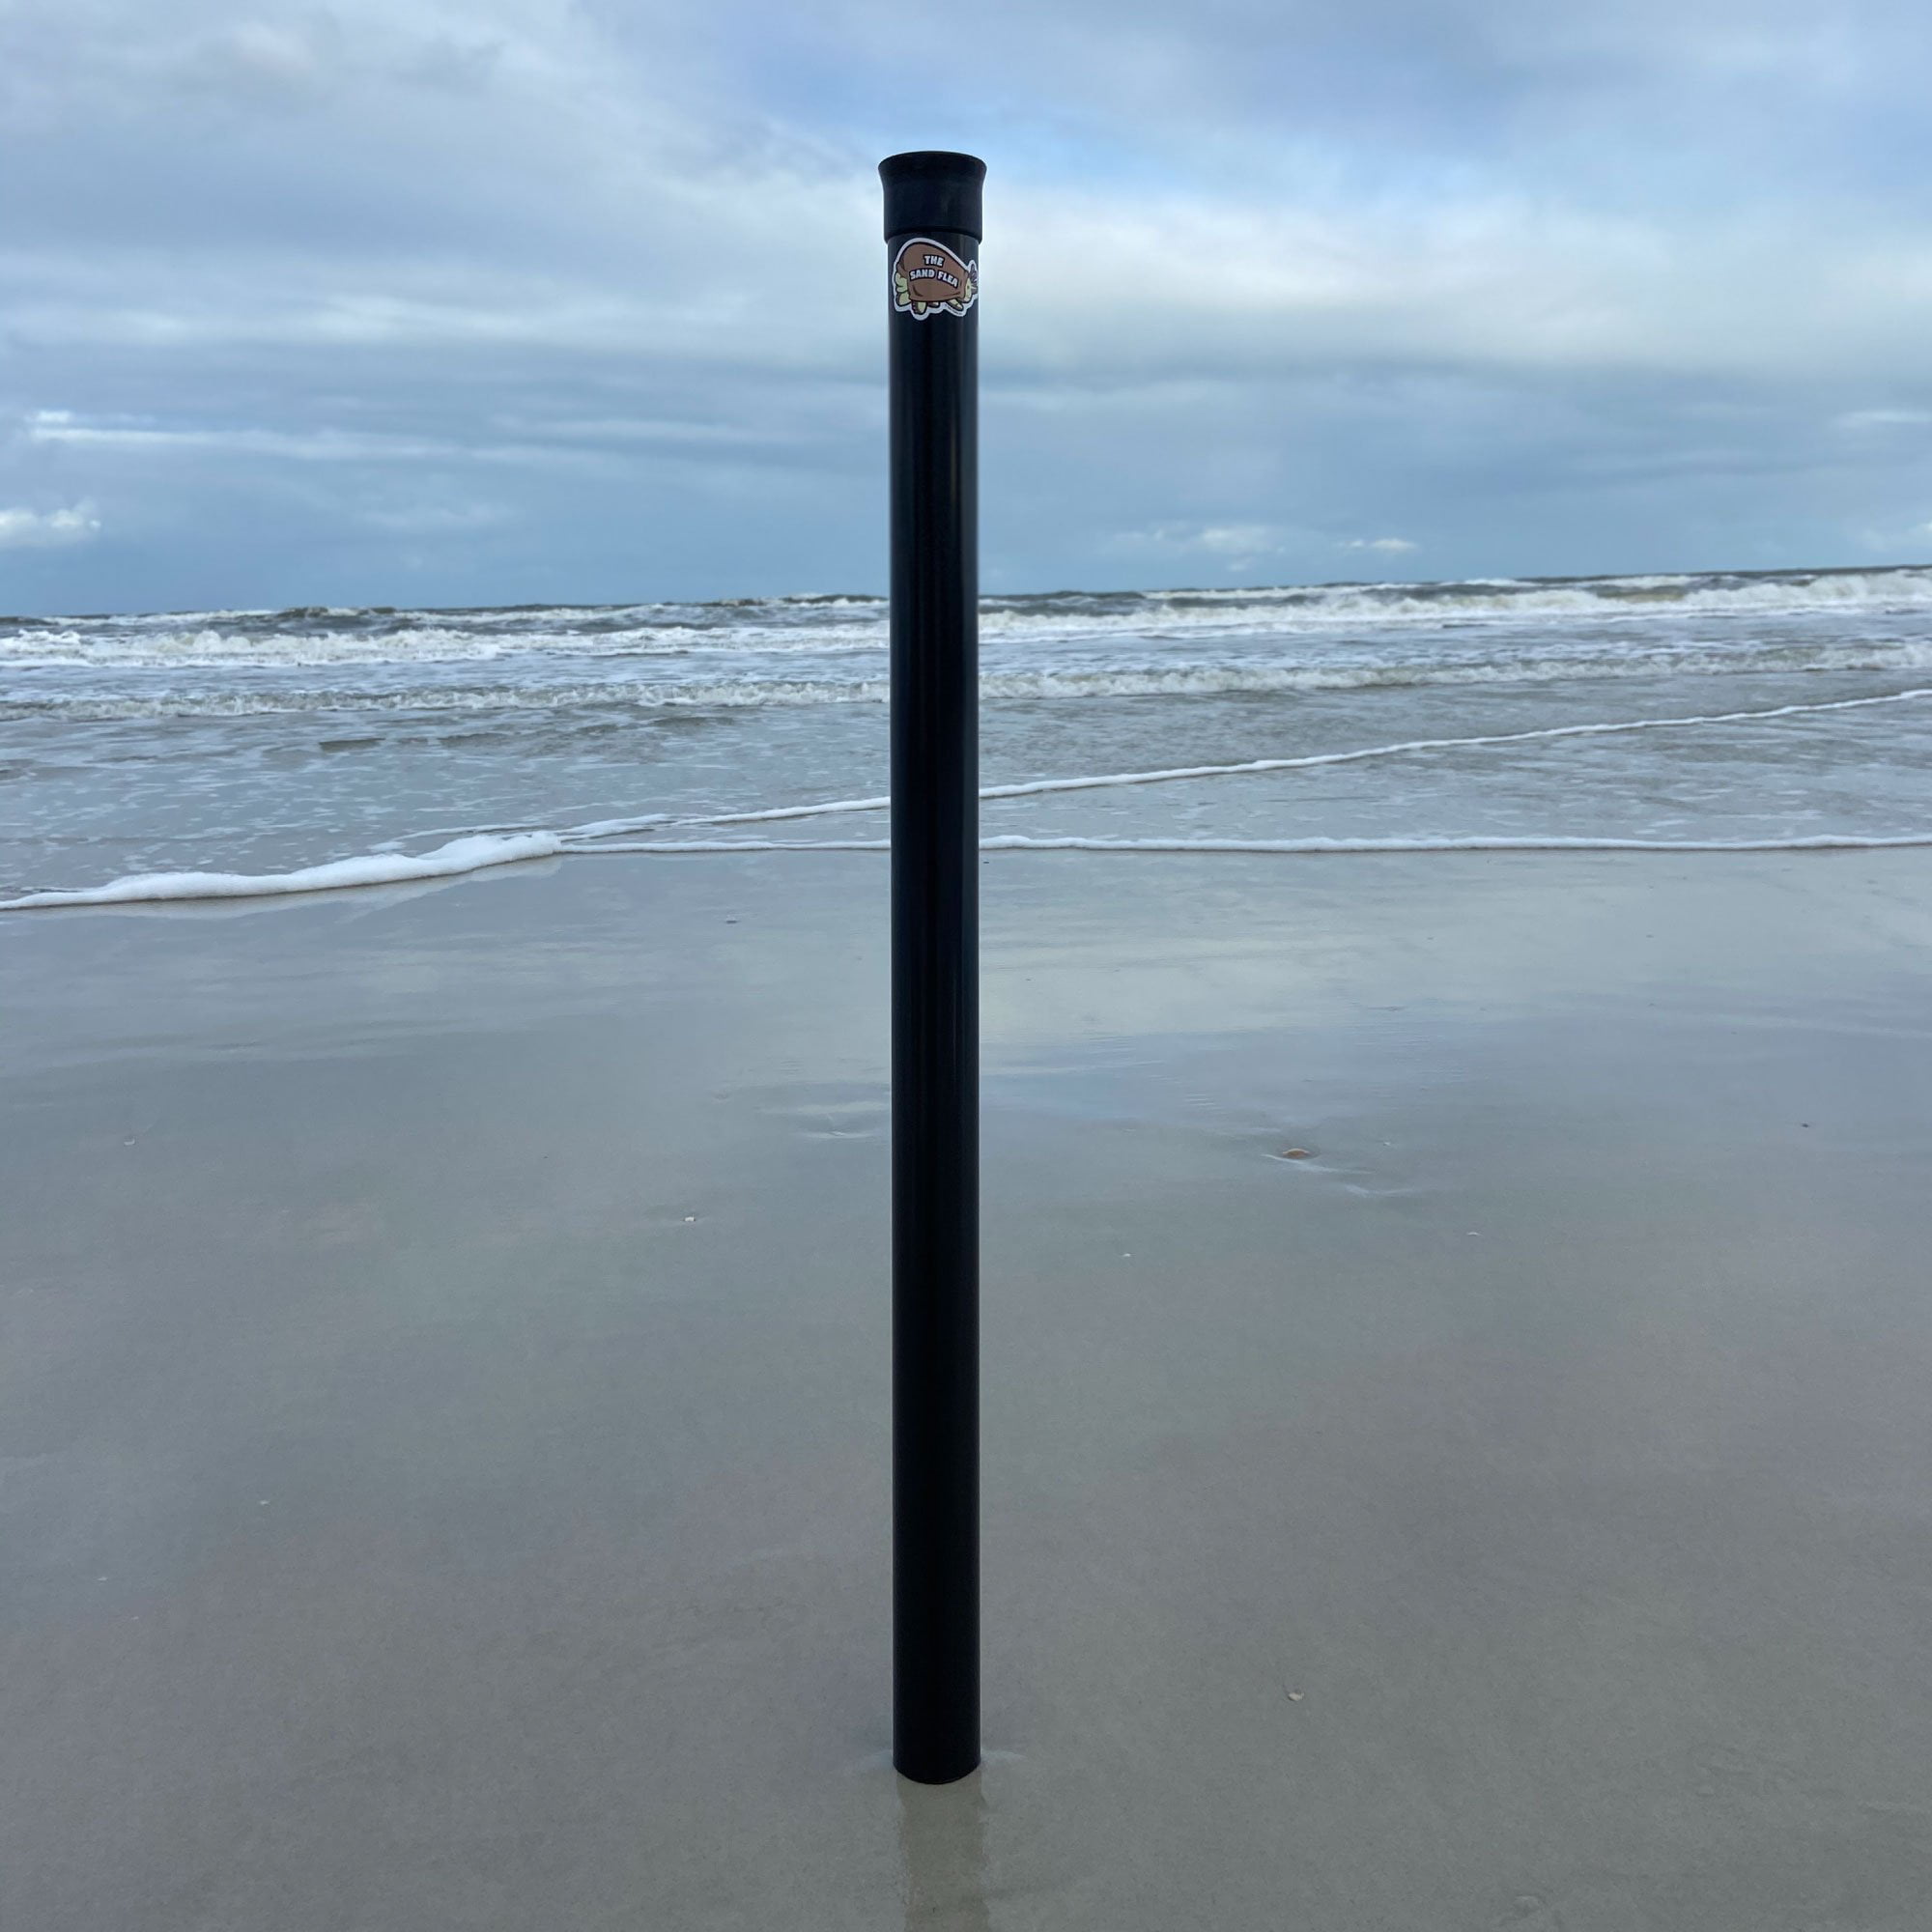 Sand Flea Surf Fishing Rod Holder Beach Sand Spike. 2, 3 or 4 Foot Lengths.  Made from Impact and UV Resistant PVC. 100% USA Made. (Black, 3)